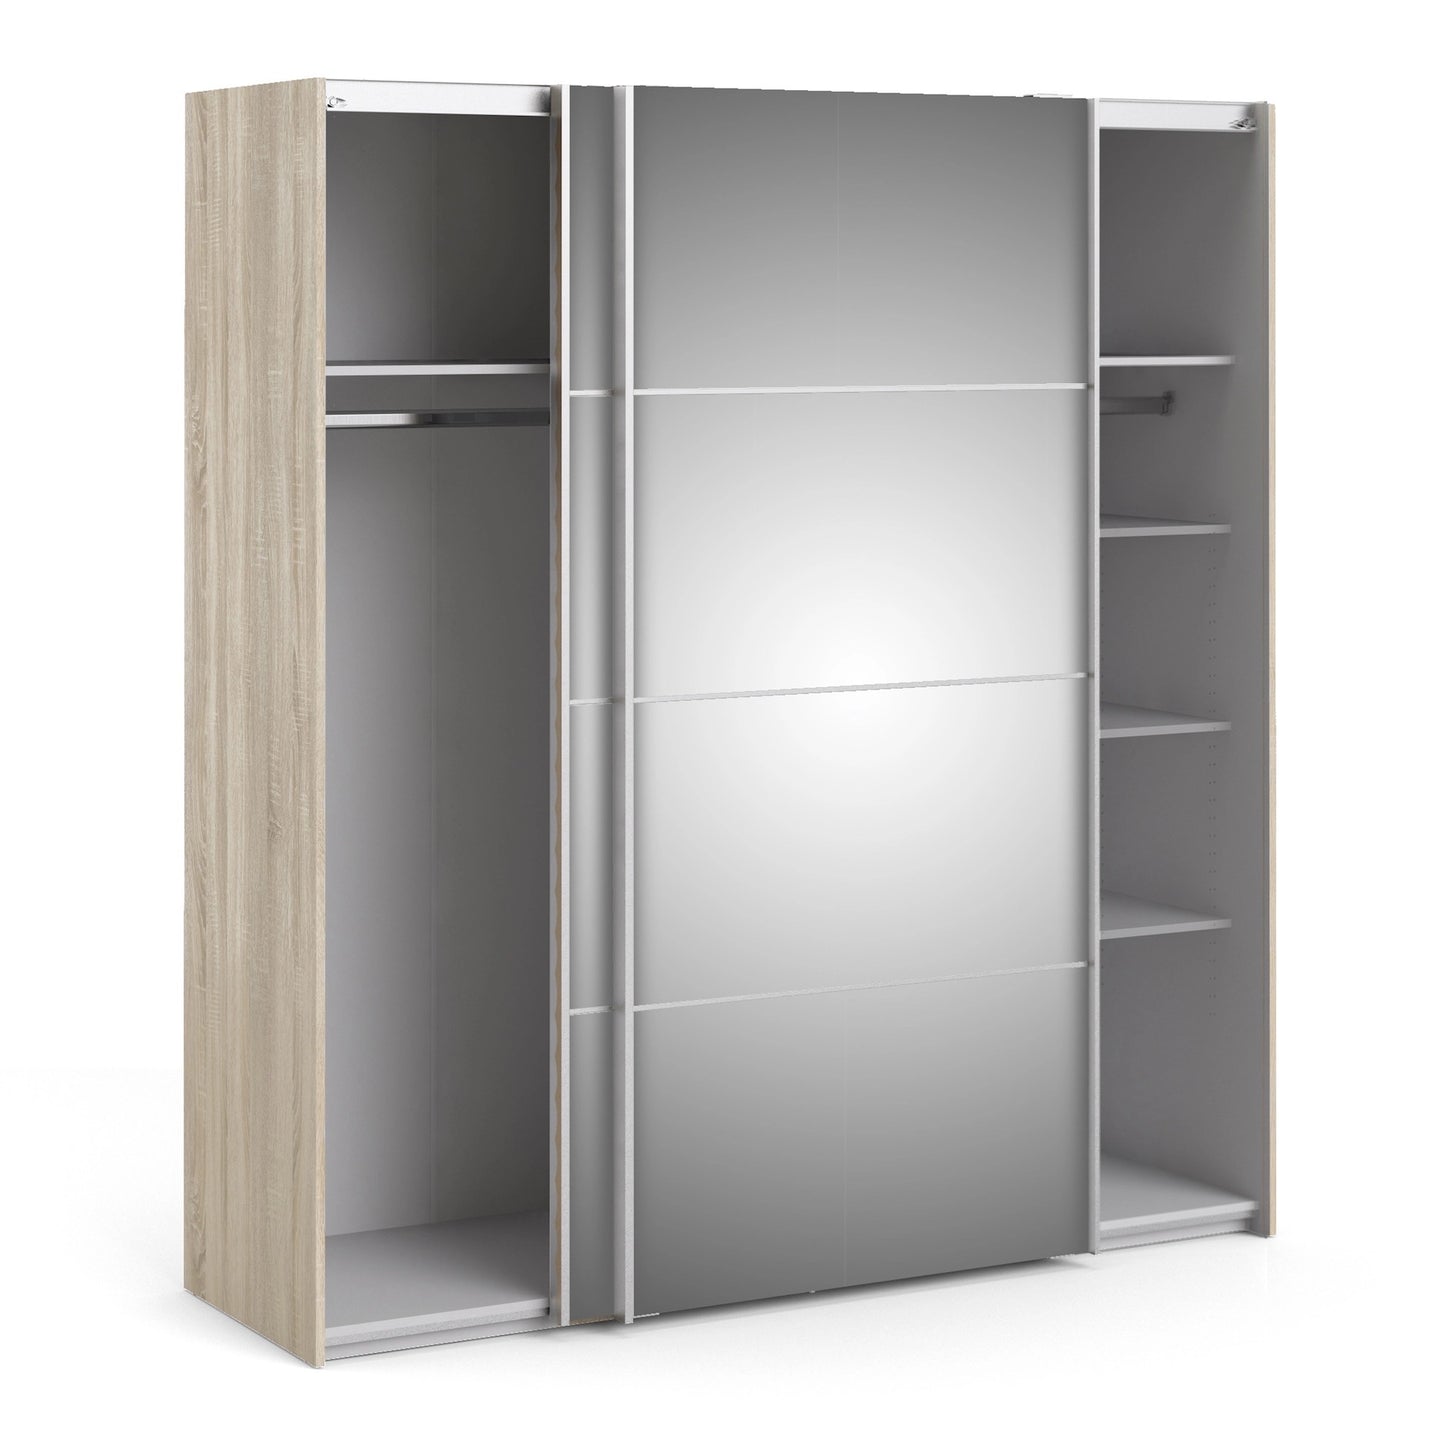 Furniture To Go Verona Sliding Wardrobe 180cm in Oak with Mirror Doors with 5 Shelves